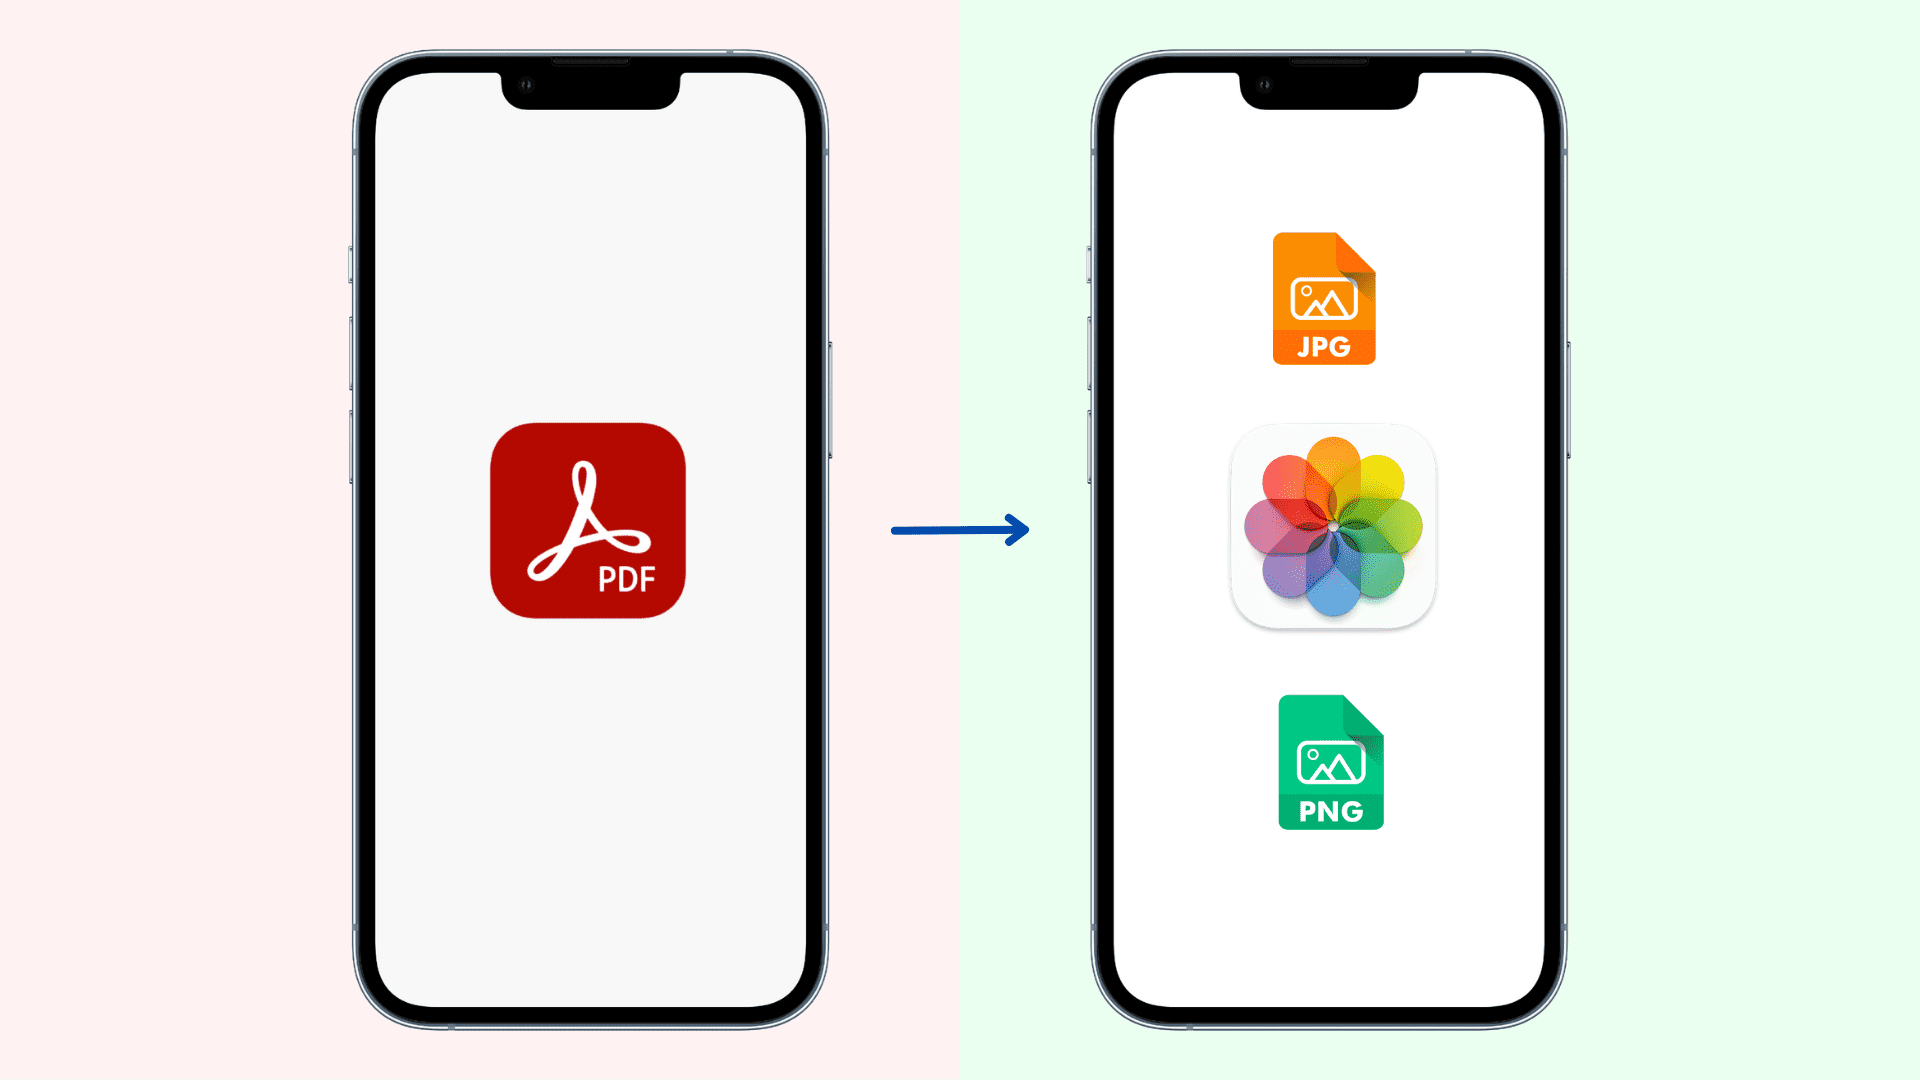 How to convert a PDF to JPG or PNG on iPhone and iPad